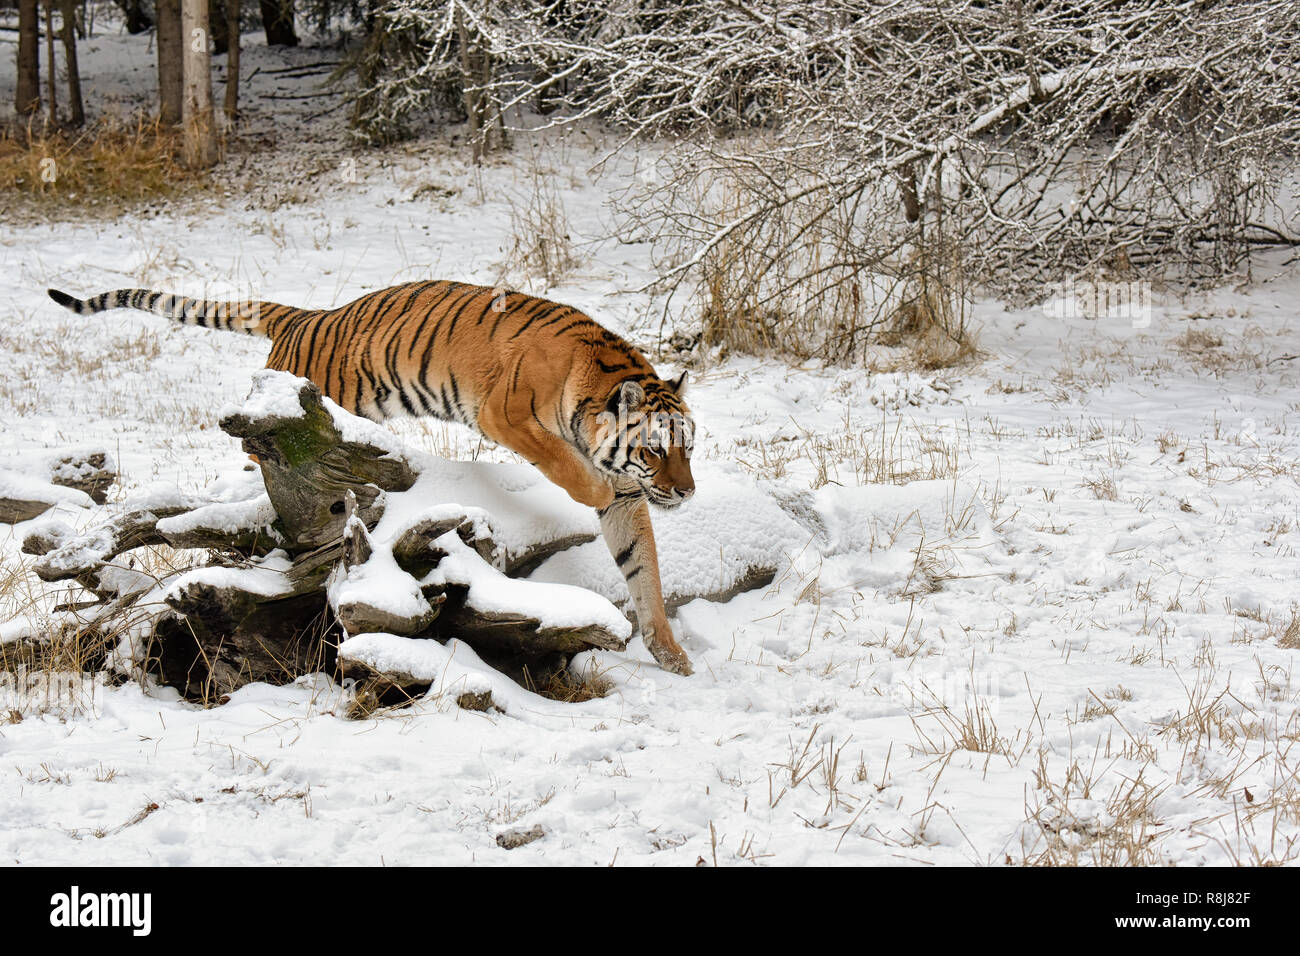 Tiger Jumping over a Snow Covered Fallen Log in Winter Stock Photo